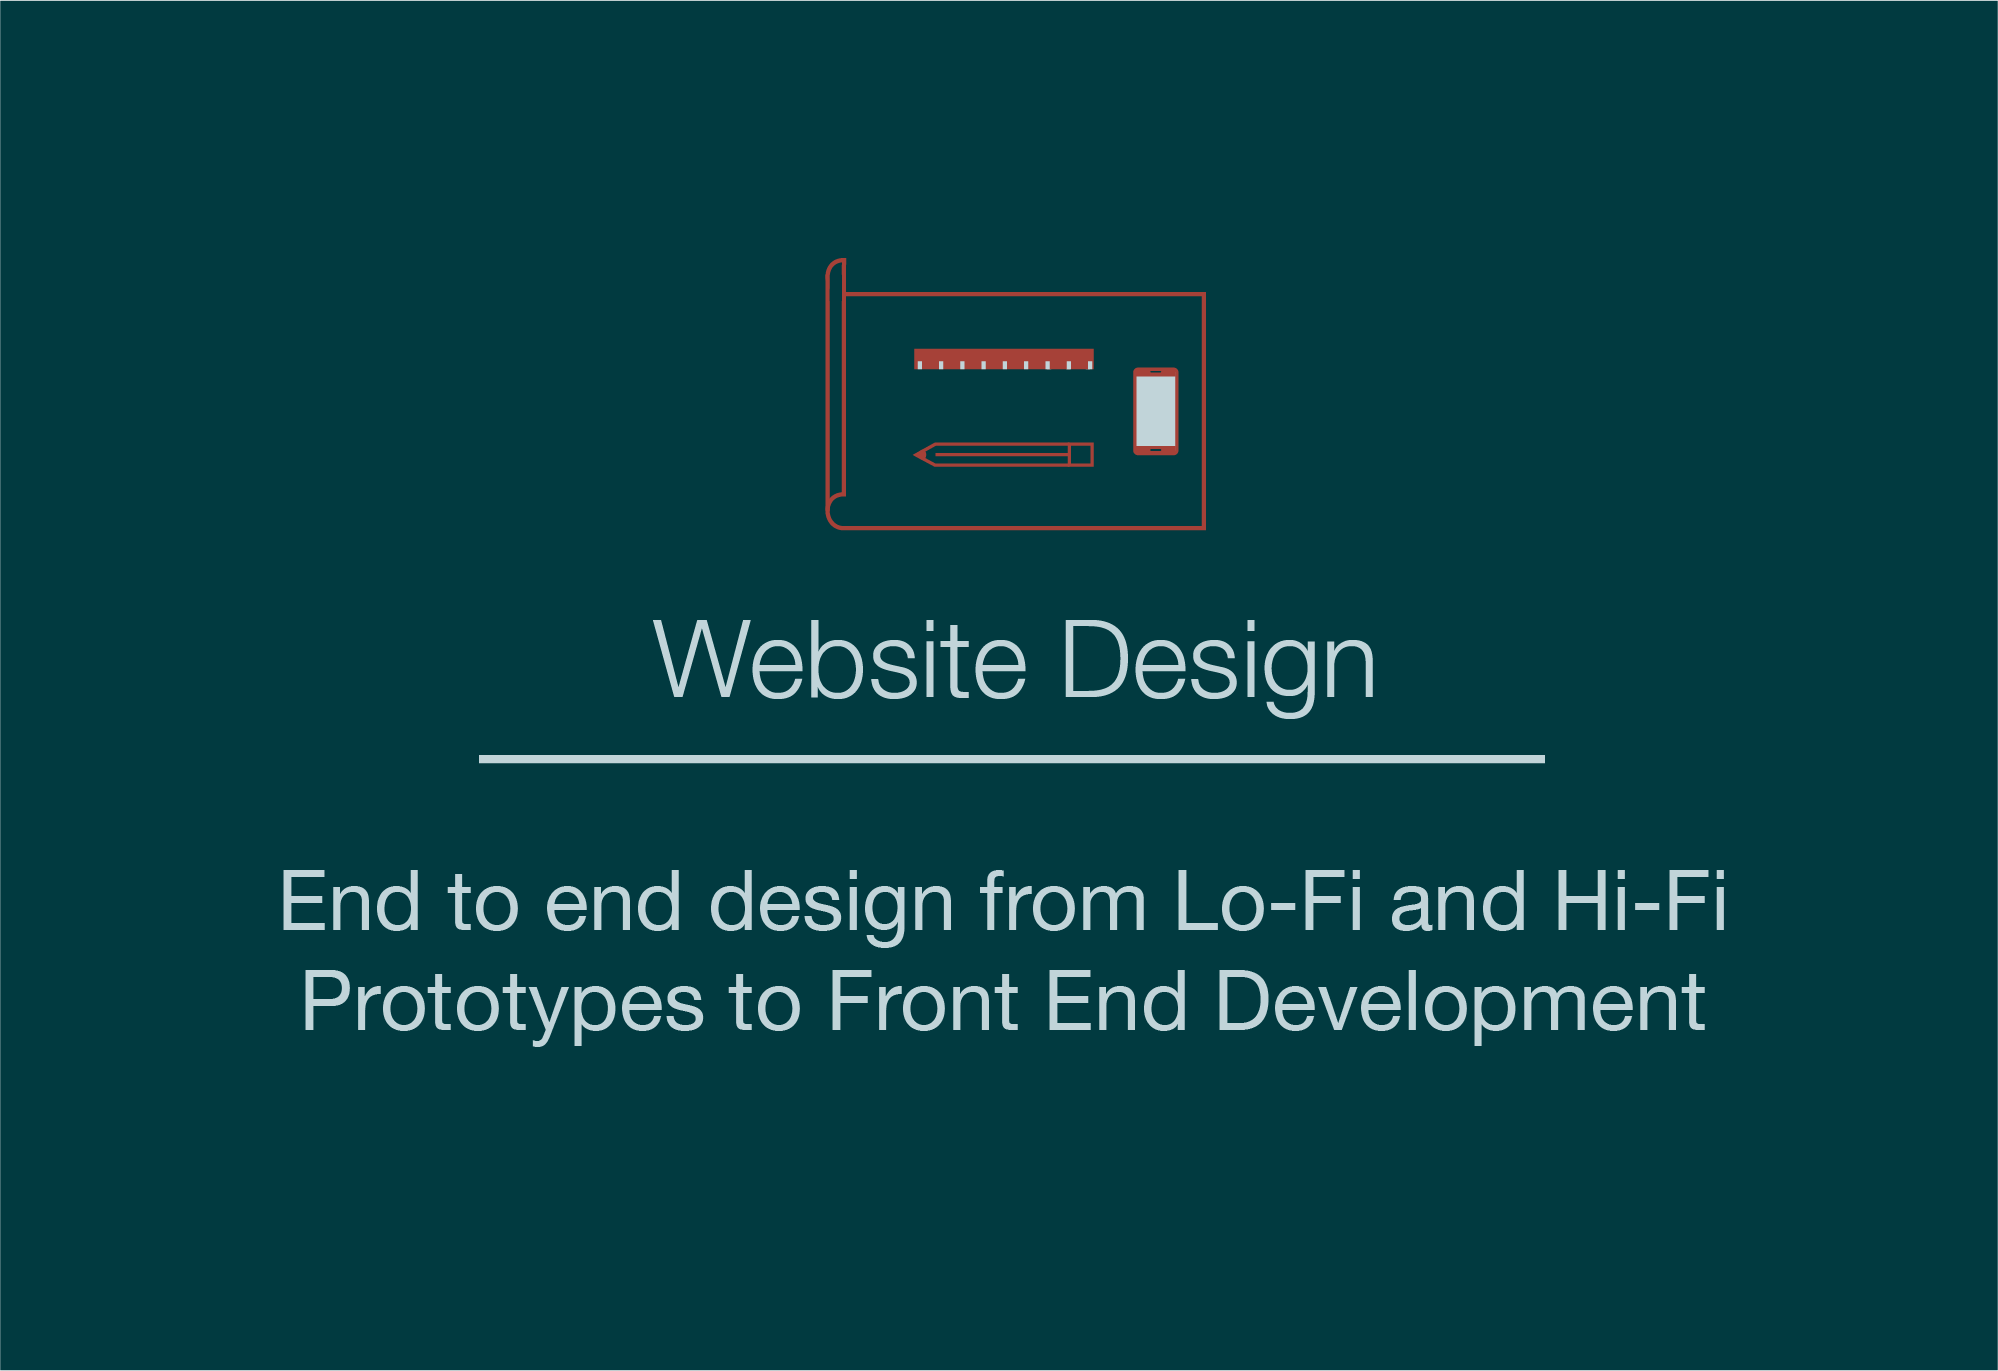 End to end design from lo-fi and hi-fi prototypes to frontend development.